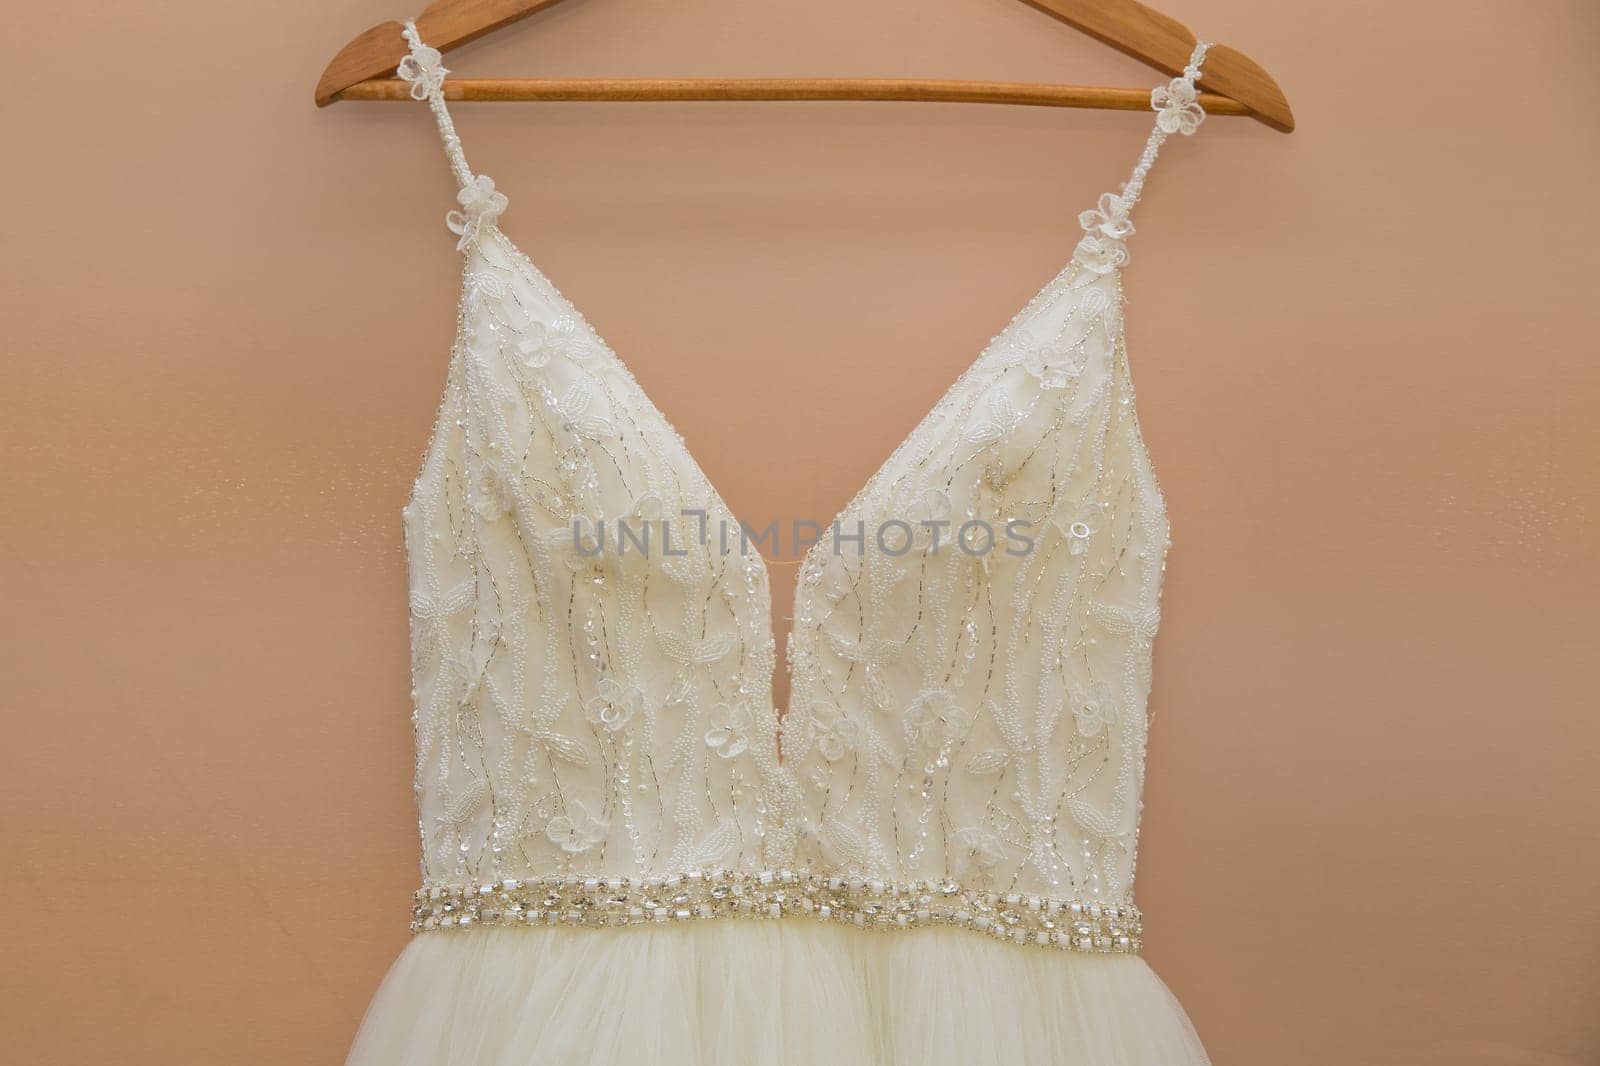 The delicate bride's dress is hanging in room. Selective focus. Close-up. by leonik